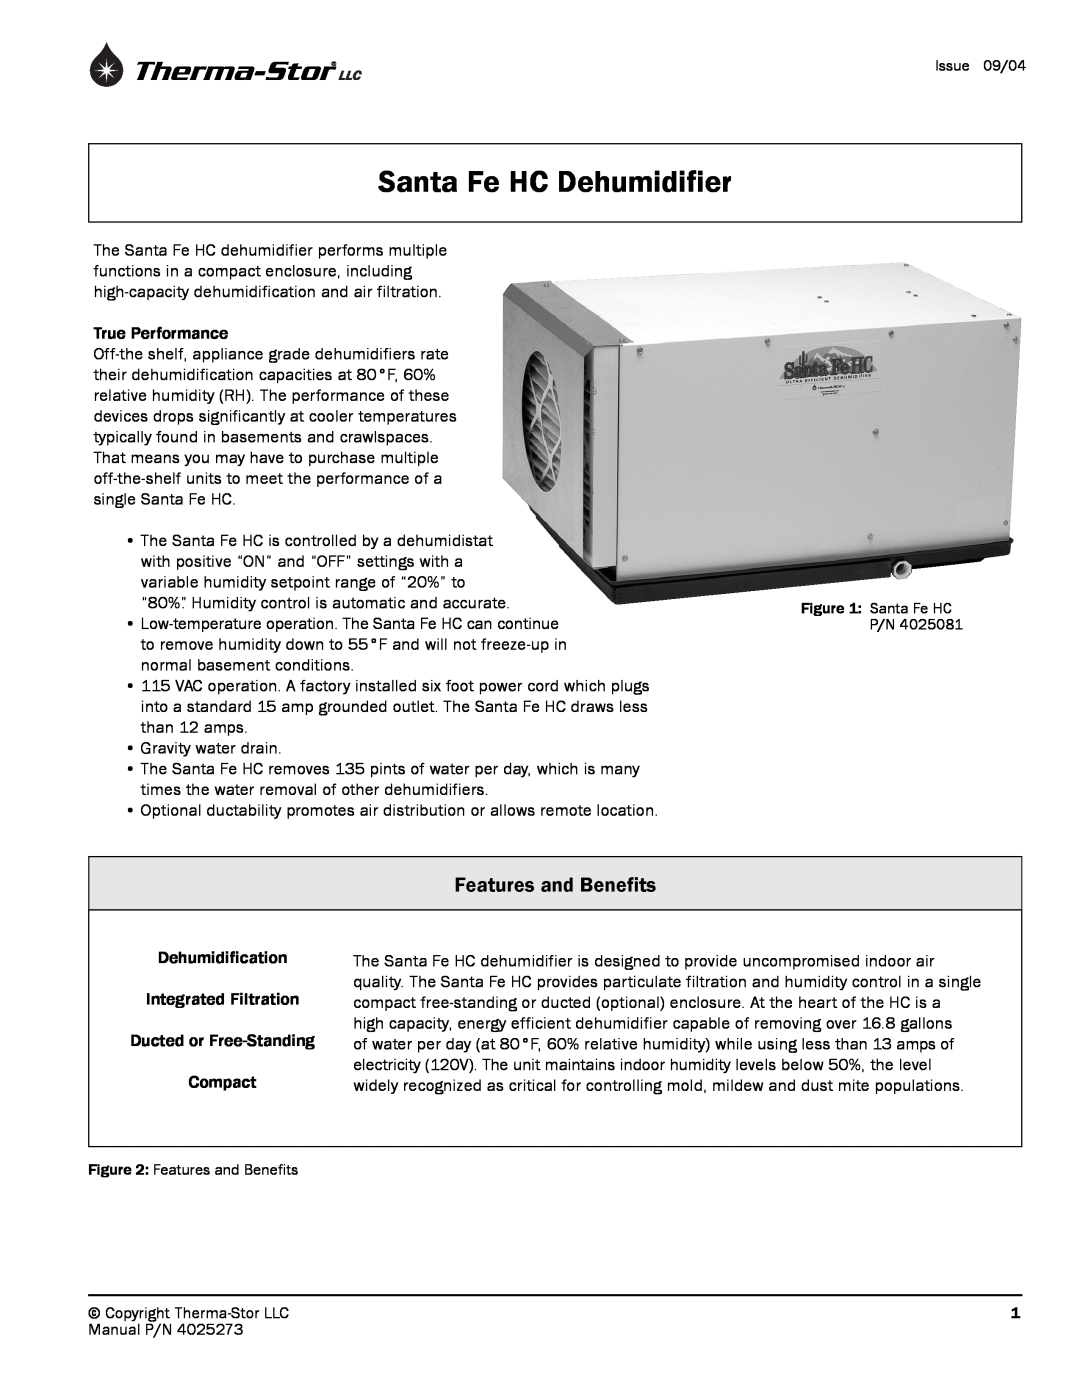 Therma-Stor Products Group 4025273 manual Santa Fe HC Dehumidifier, Features and Benefits 